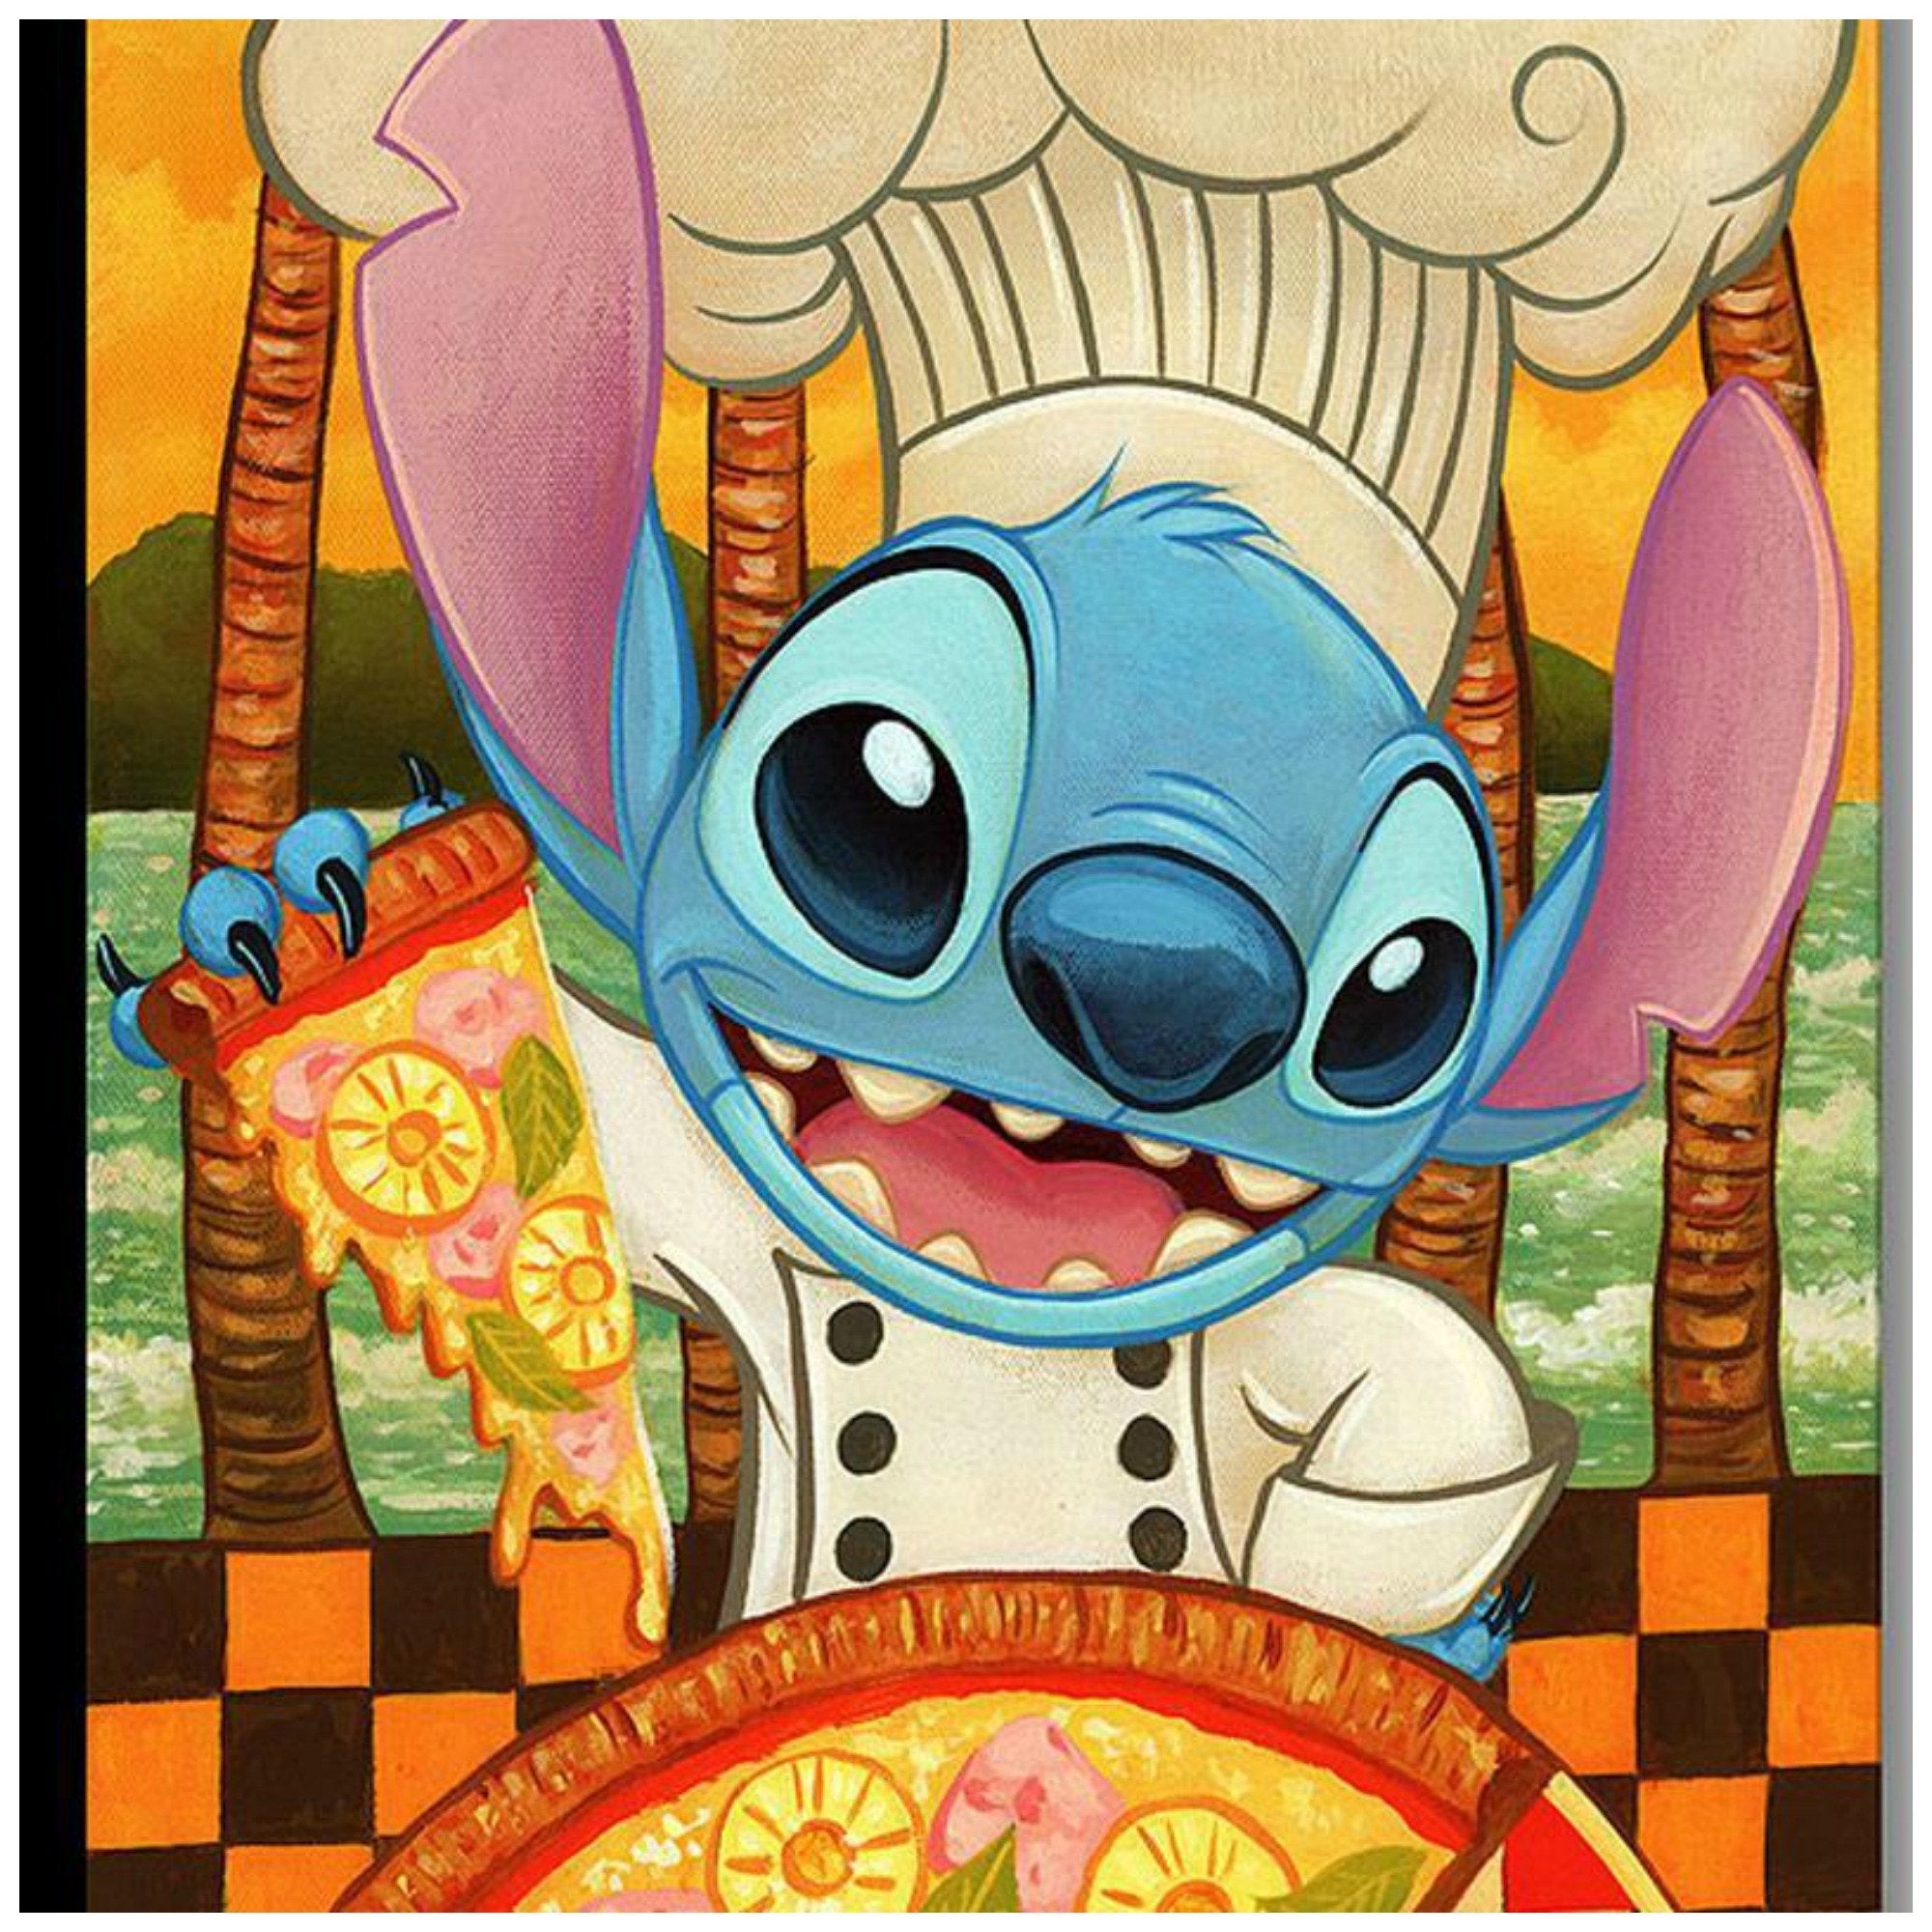  Hawaiian Pizza by Tim Rogerson  Chef Stitch is all smiles in this billboard style cameo poses, holding a slice of pineapple pizza - closeup